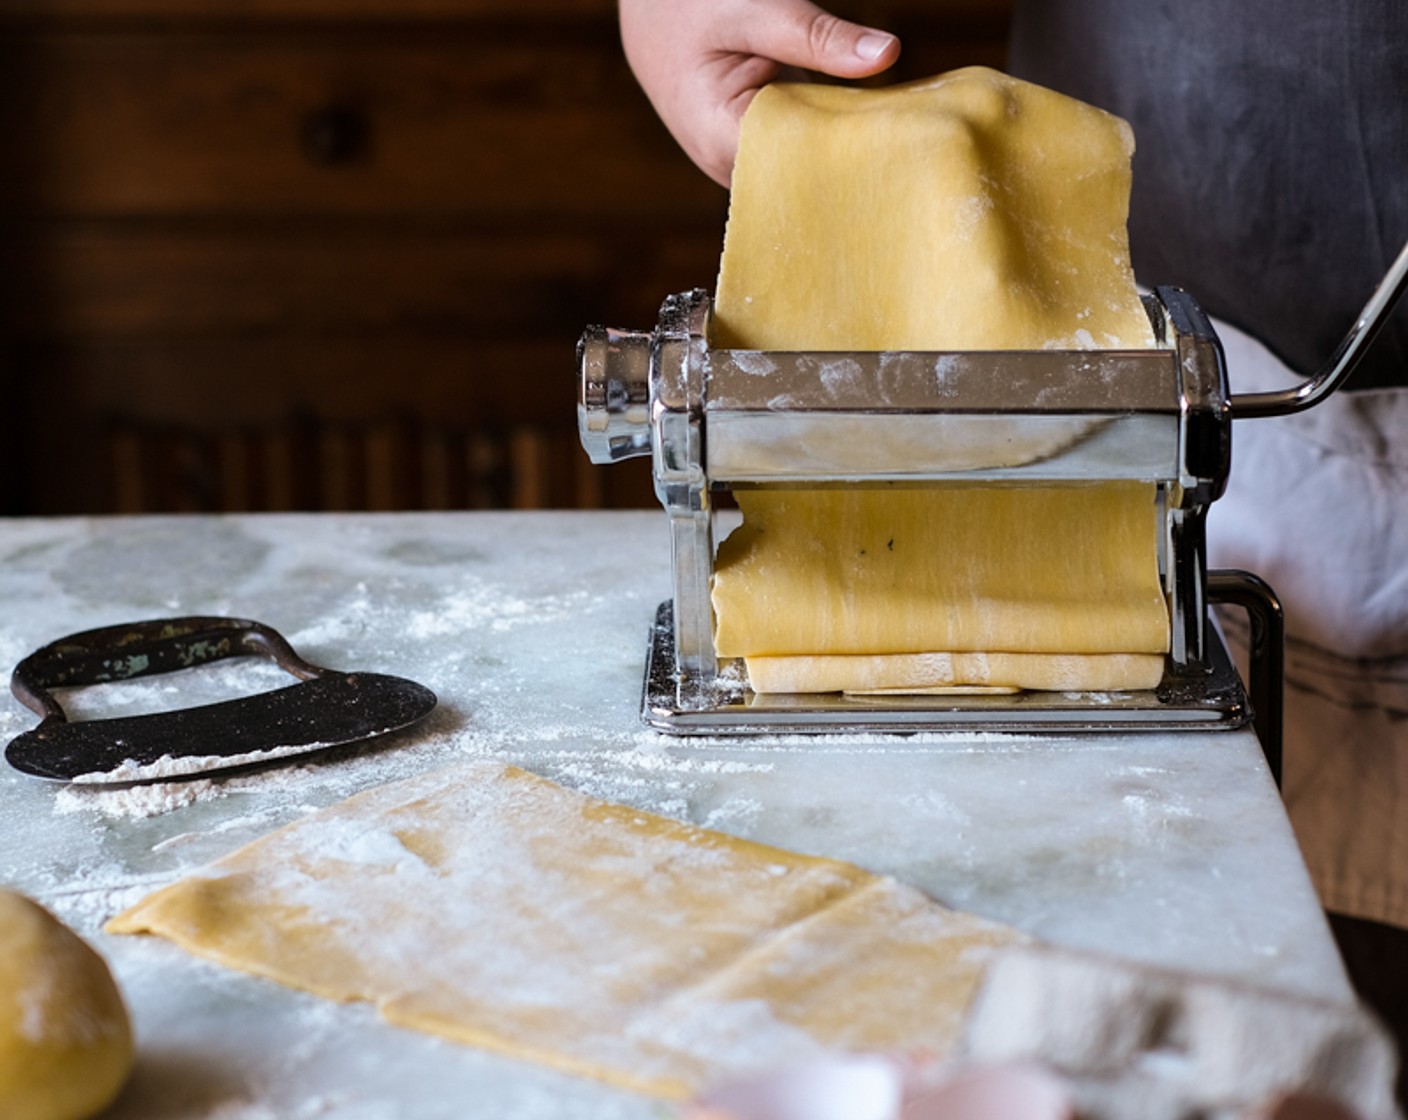 step 9 Halve the dough and keep one half wrapped in clingfilm to prevent it from drying out. Using a pasta machine or a rolling pin, roll out half the dough until you have a thin strip about 8 centimeters wide.